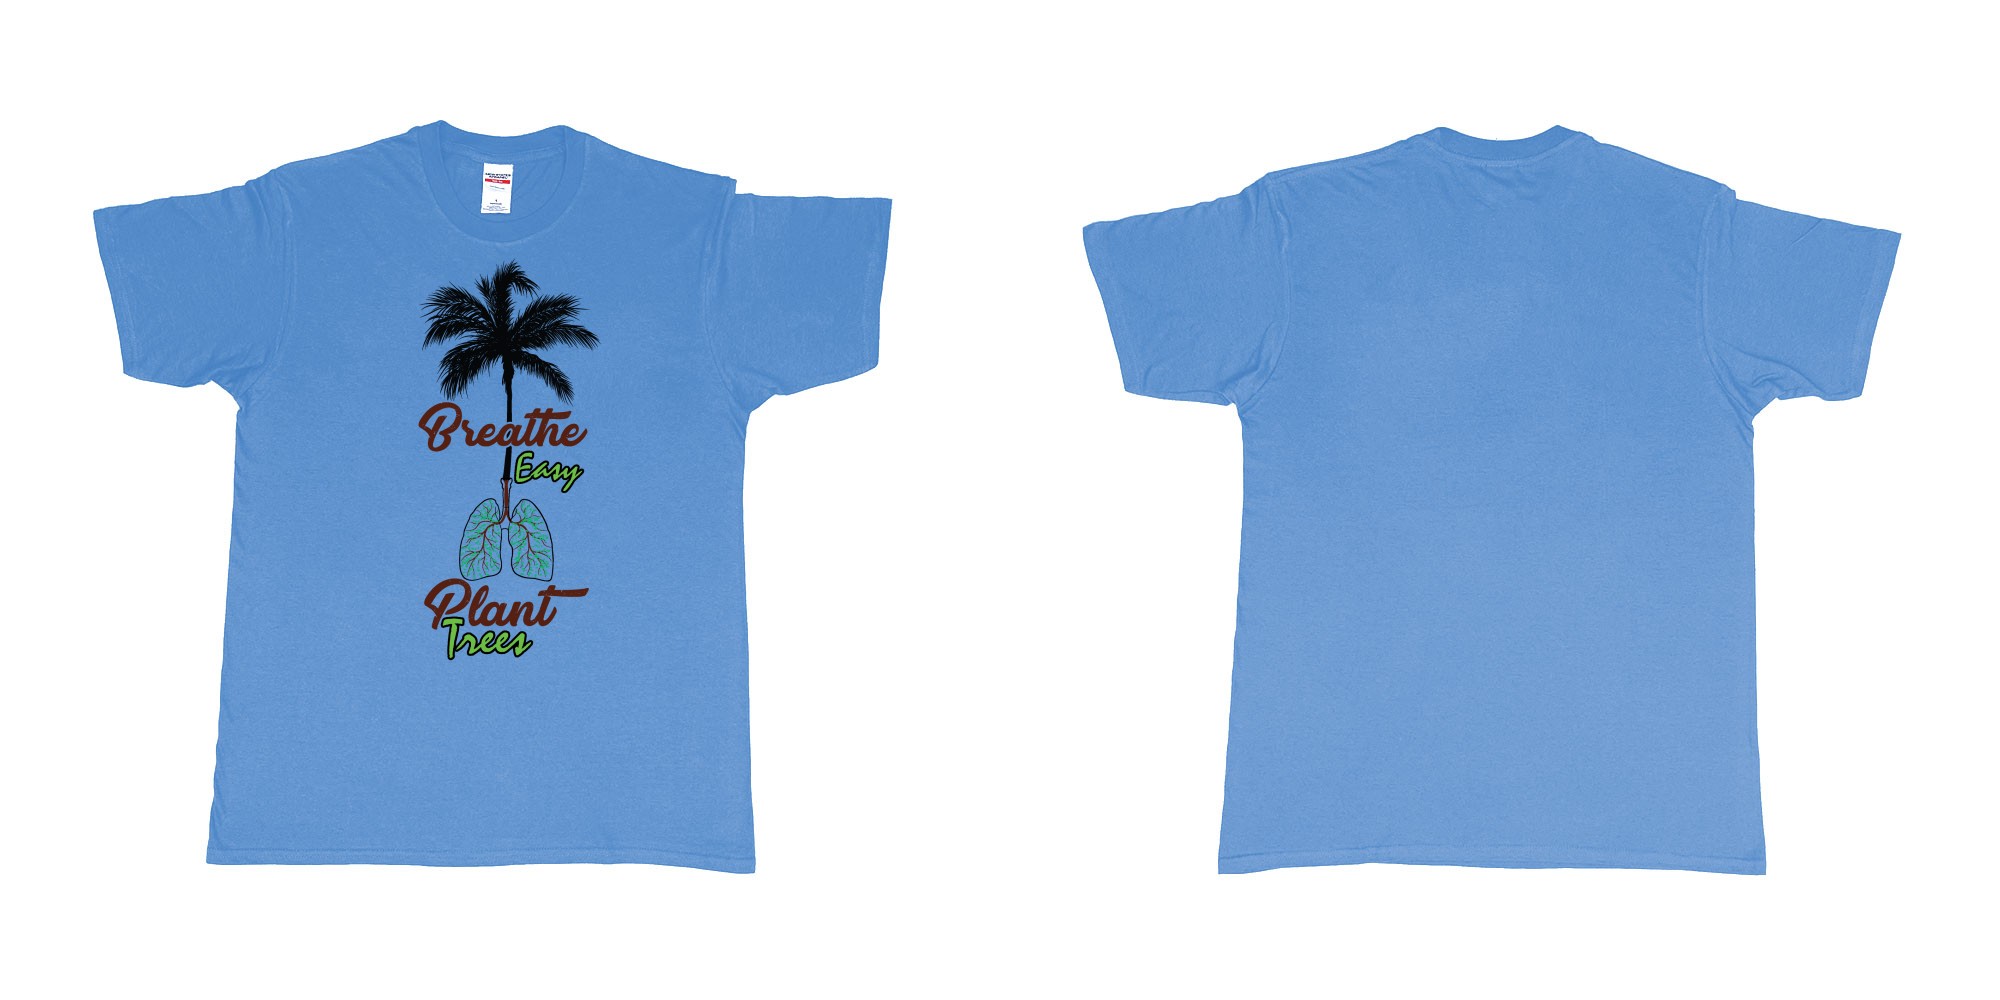 Custom tshirt design breathe easy and plant a tree for better air for everyone in fabric color carolina-blue choice your own text made in Bali by The Pirate Way